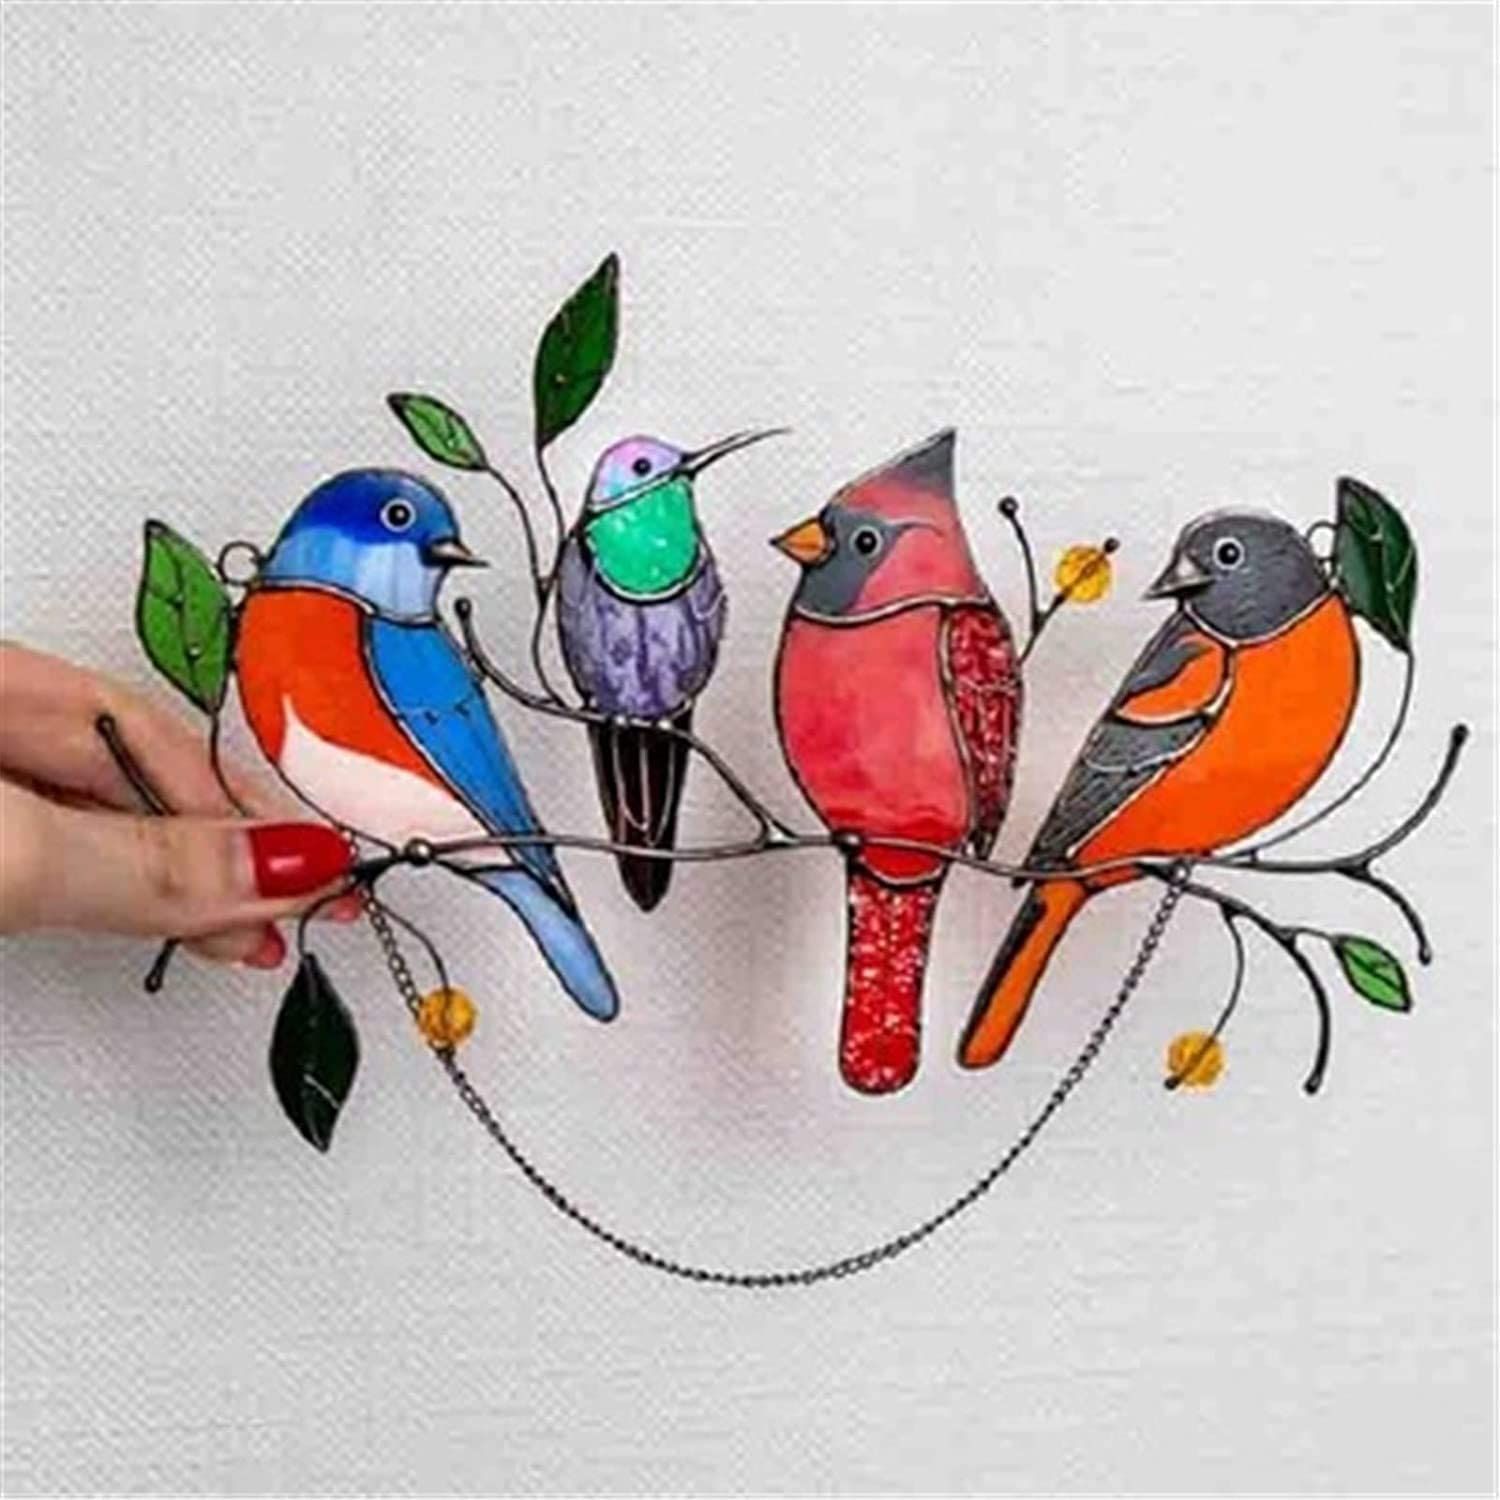 A Bird Series Ornaments Pendant Home Decoration Sun Catcher Acrylic Hanging Birds Decor Multicolor Birds on a Wire High Stained Glass Suncatcher Window Panel Gifts for Bird Lover 